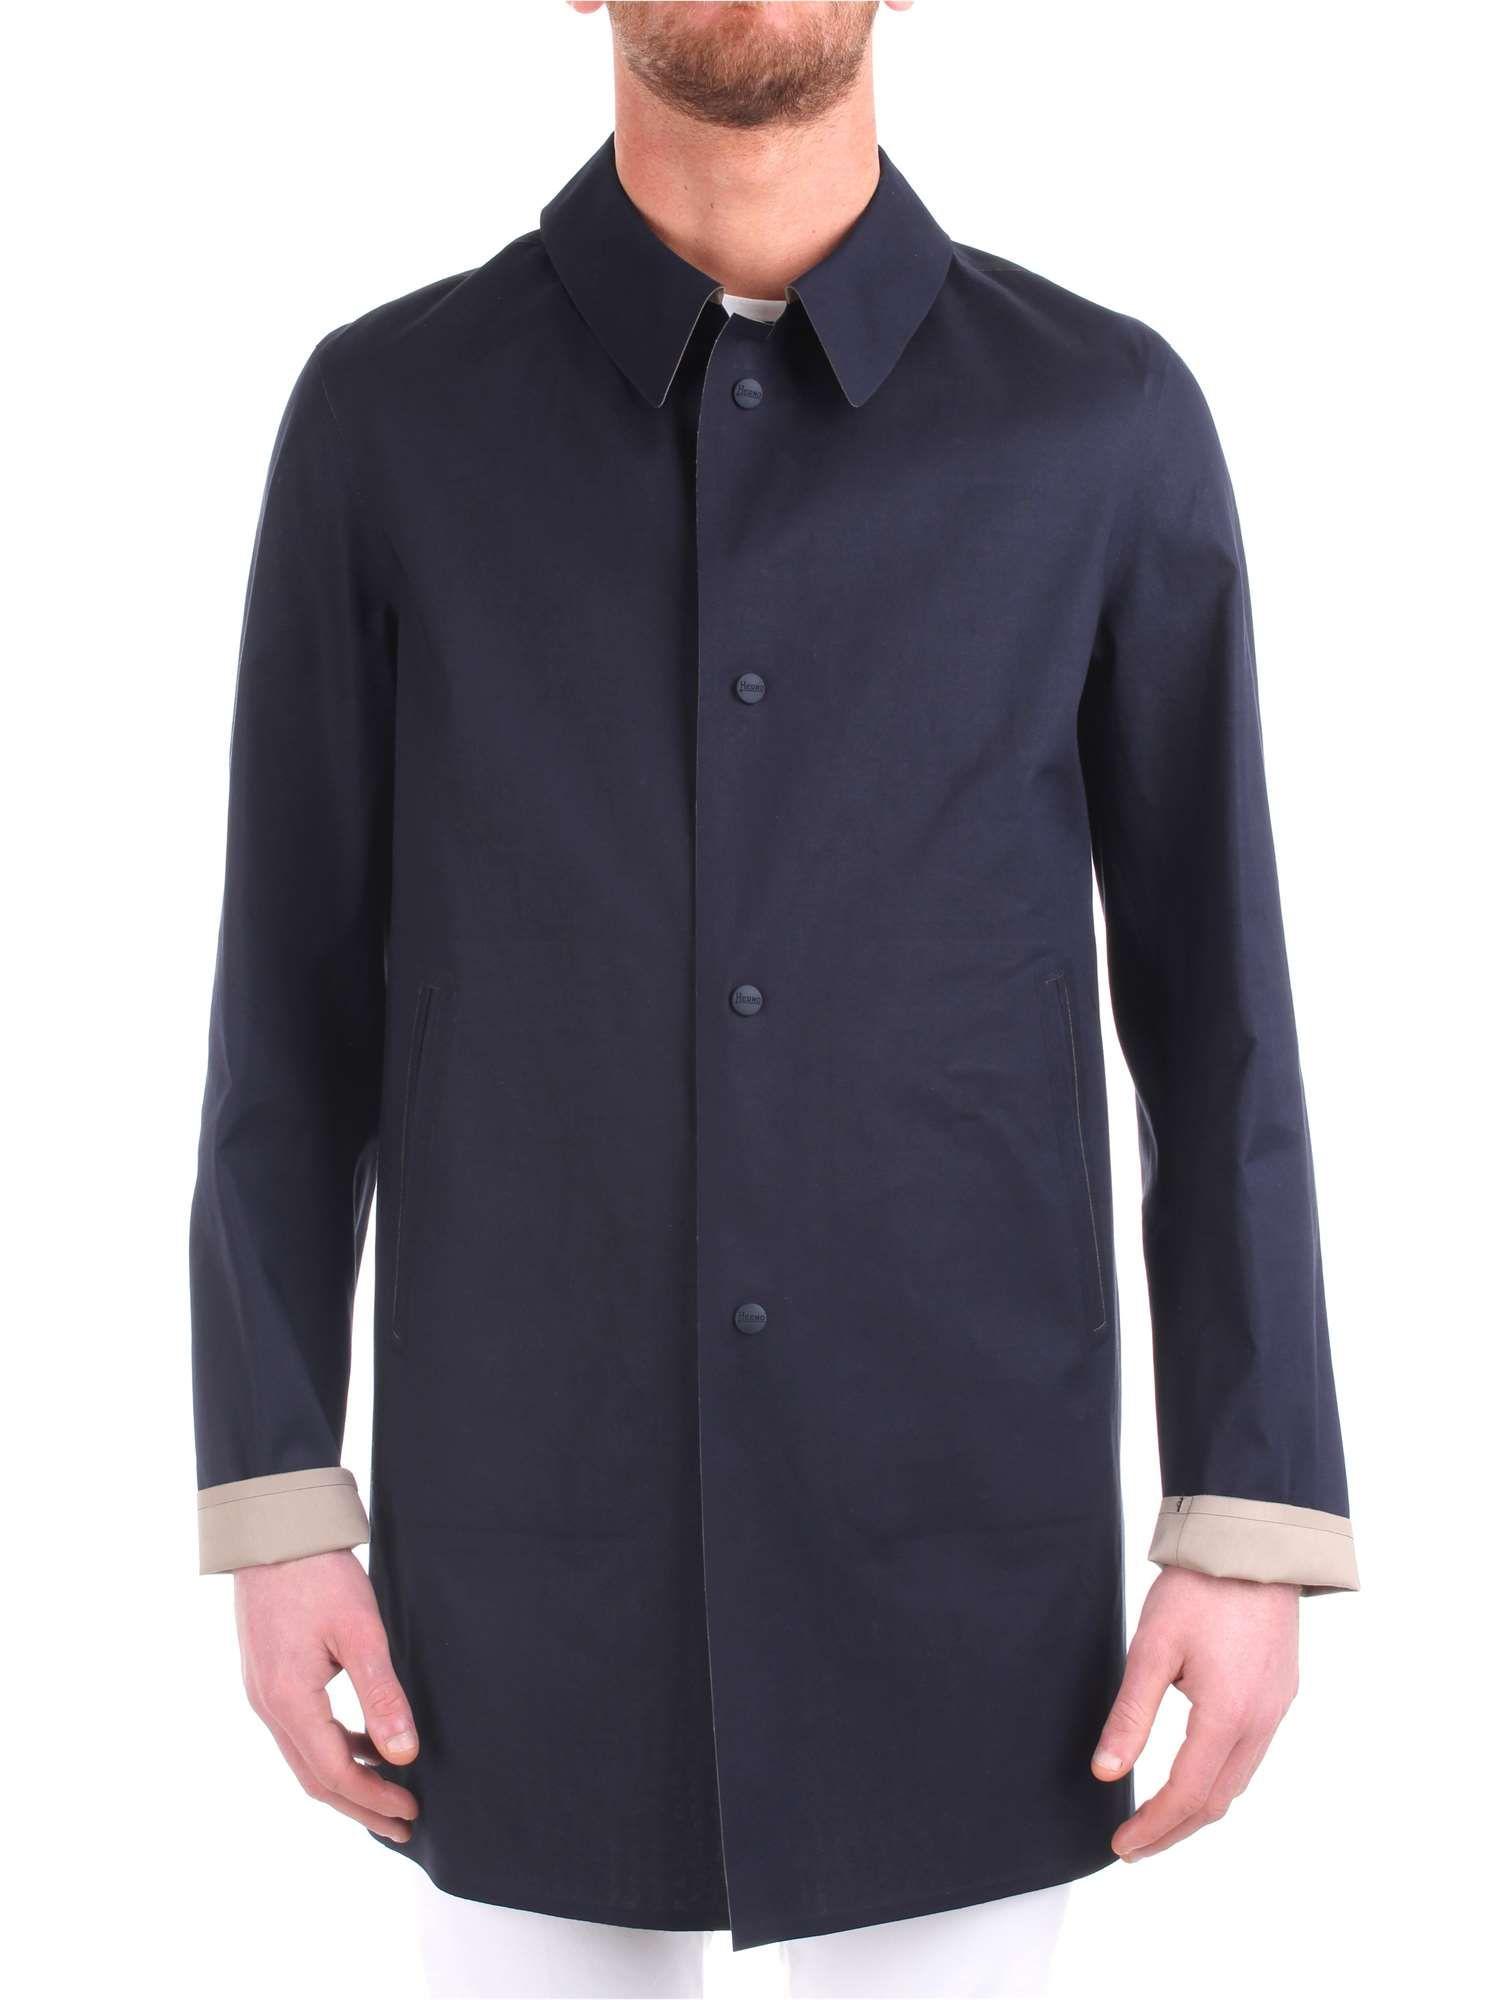 Herno Blue Polyester Trench Coat in Blue for Men - Lyst